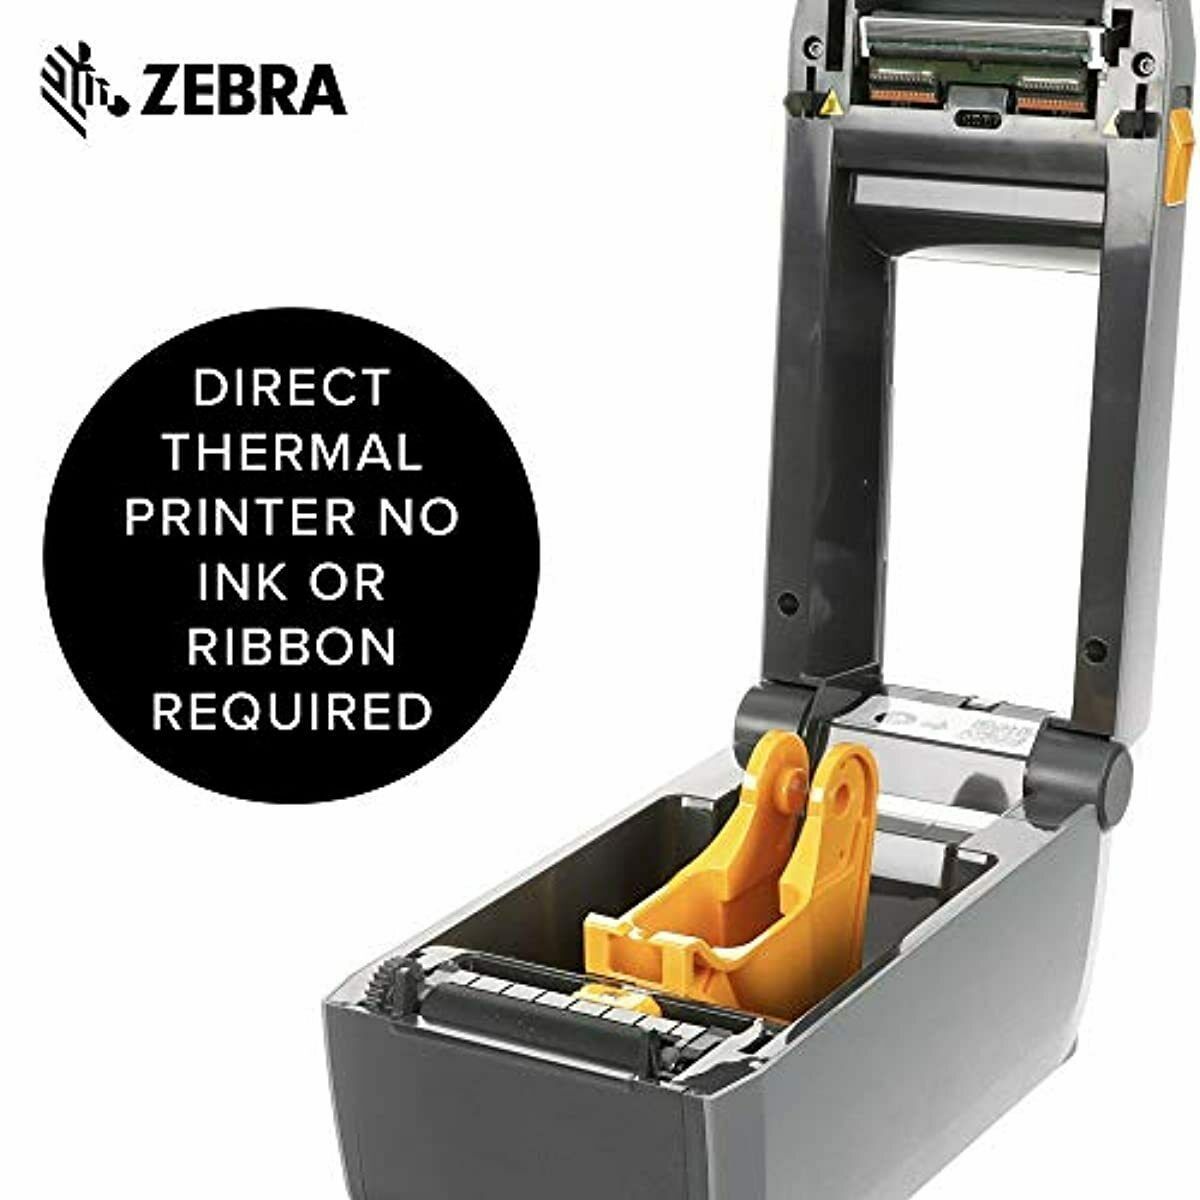 Zebra Zd410 Direct Thermal Desktop Printer For Labels Receipts Barcodes Tag Printers 5092